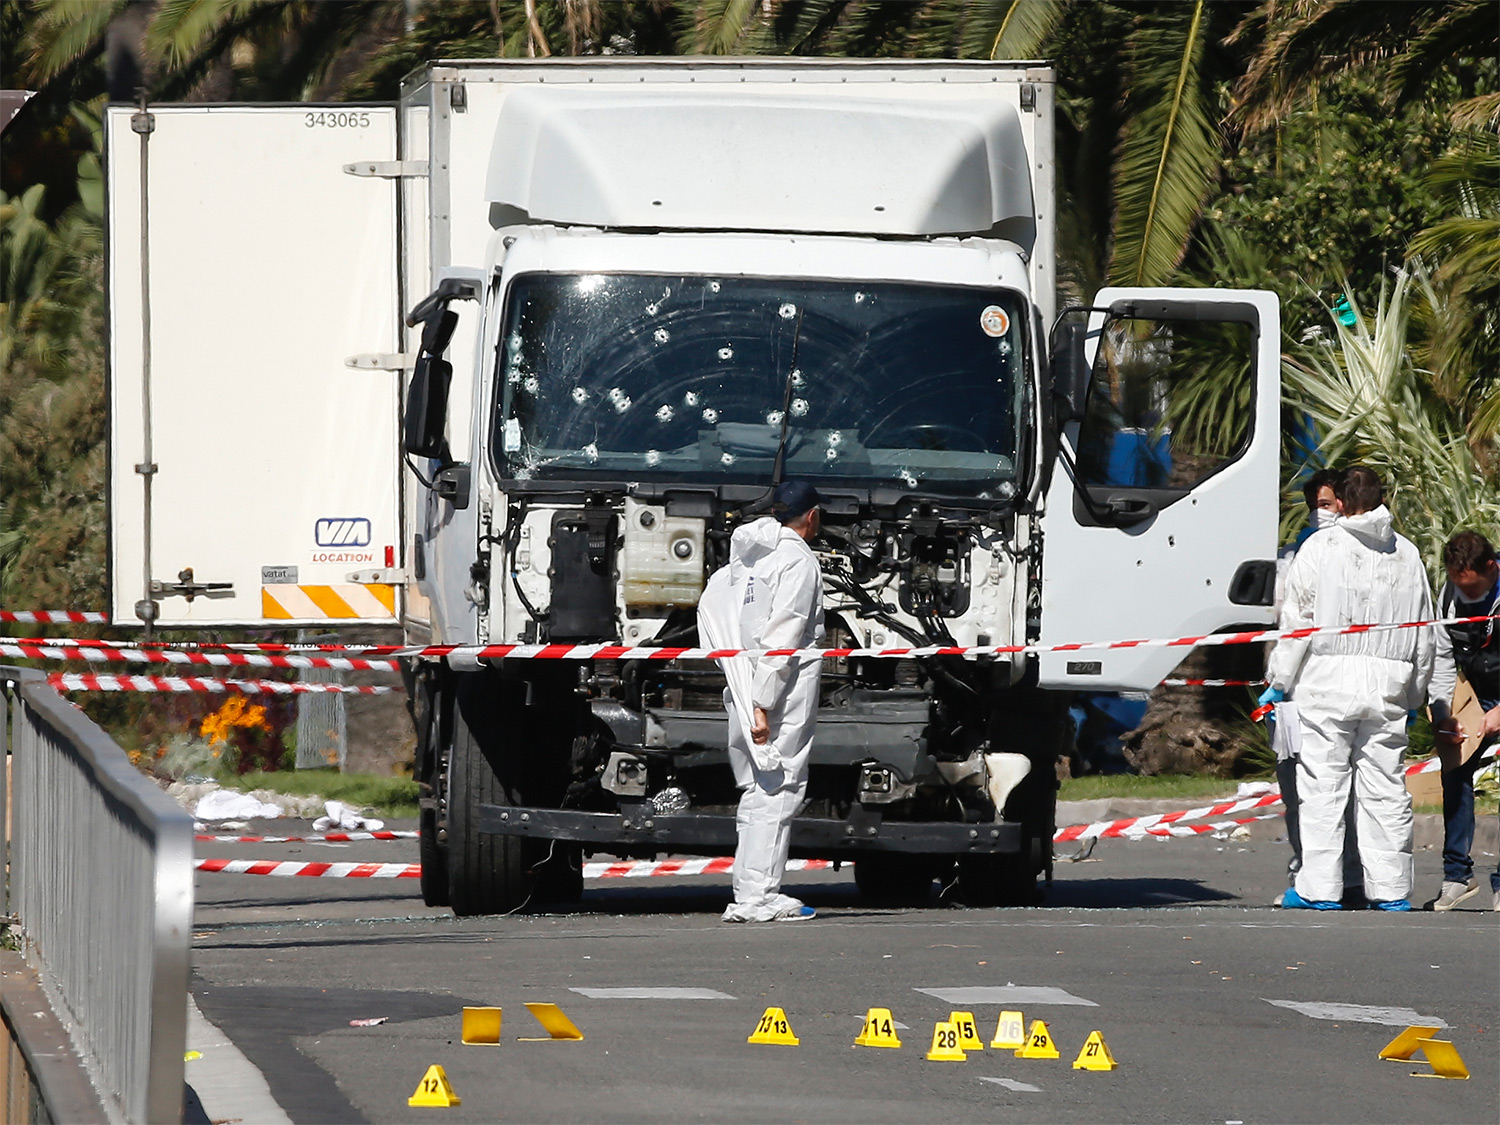 one-person-with-extraordinary-courage-stopped-the-truck-in-the-nice-attack